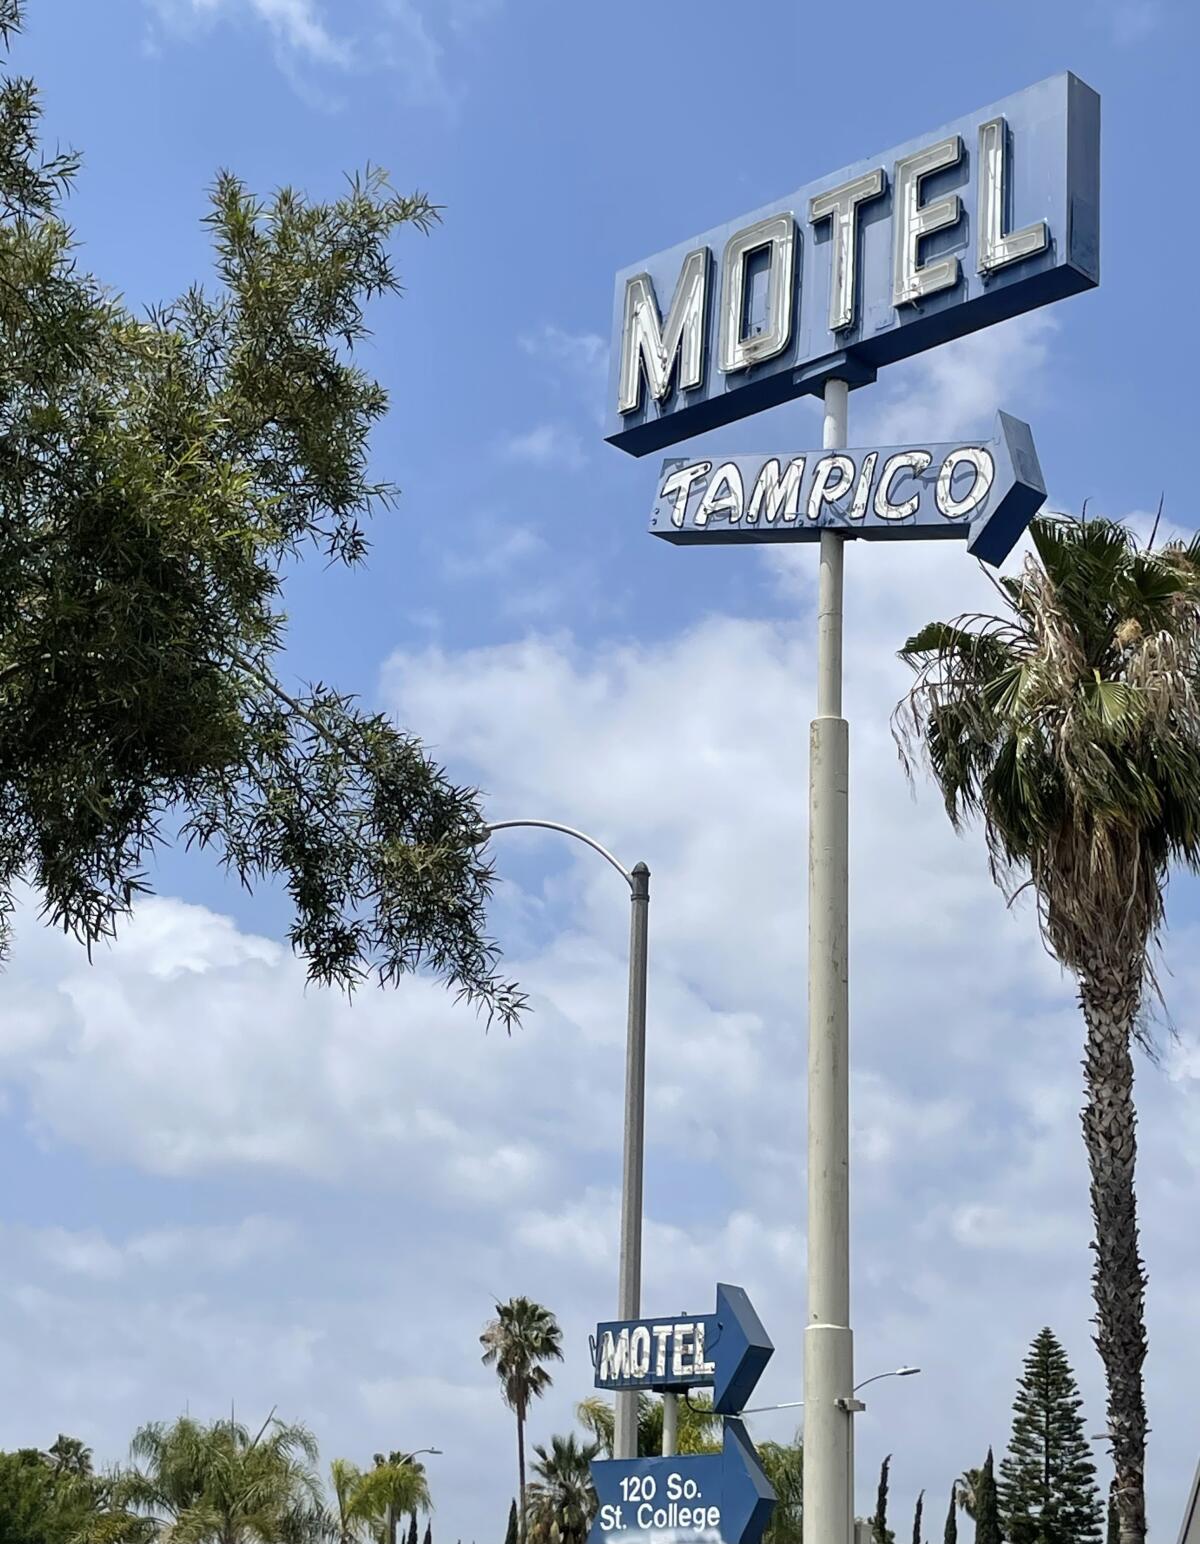 A sign for Tampico Motel